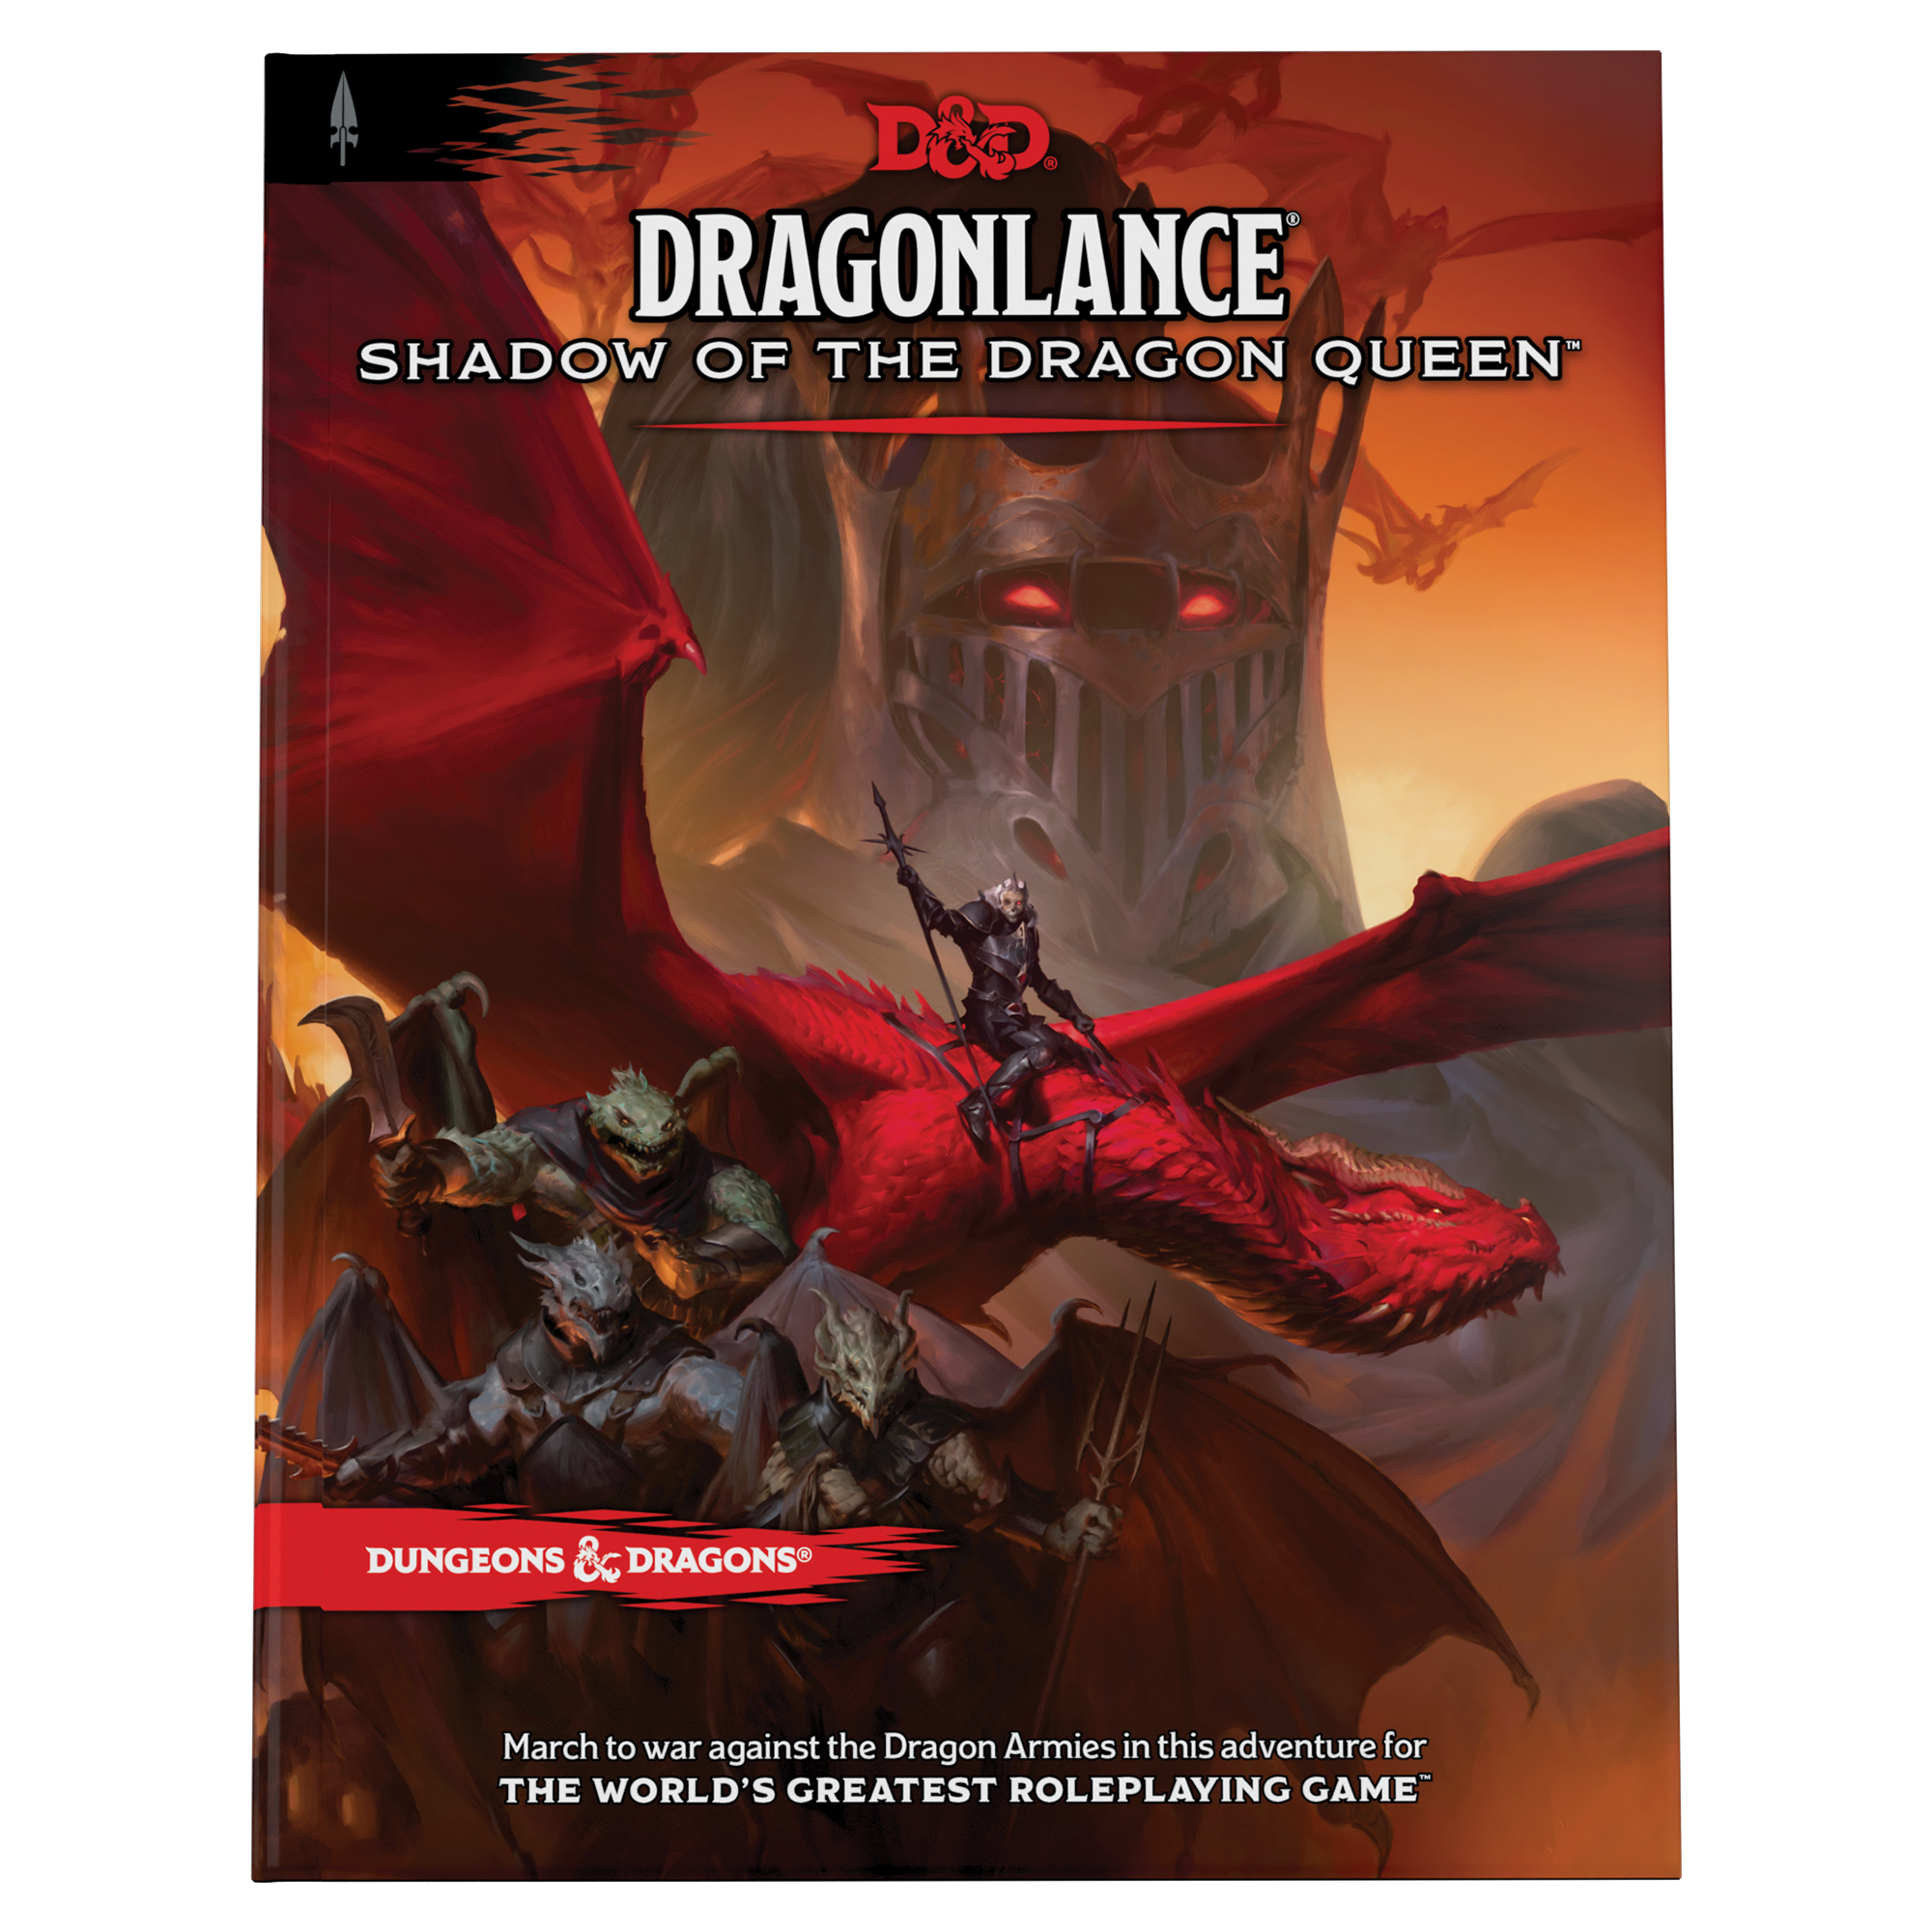 D&D RPG: DRAGONLANCE - SHADOW OF THE DRAGON QUEEN | BD Cosmos